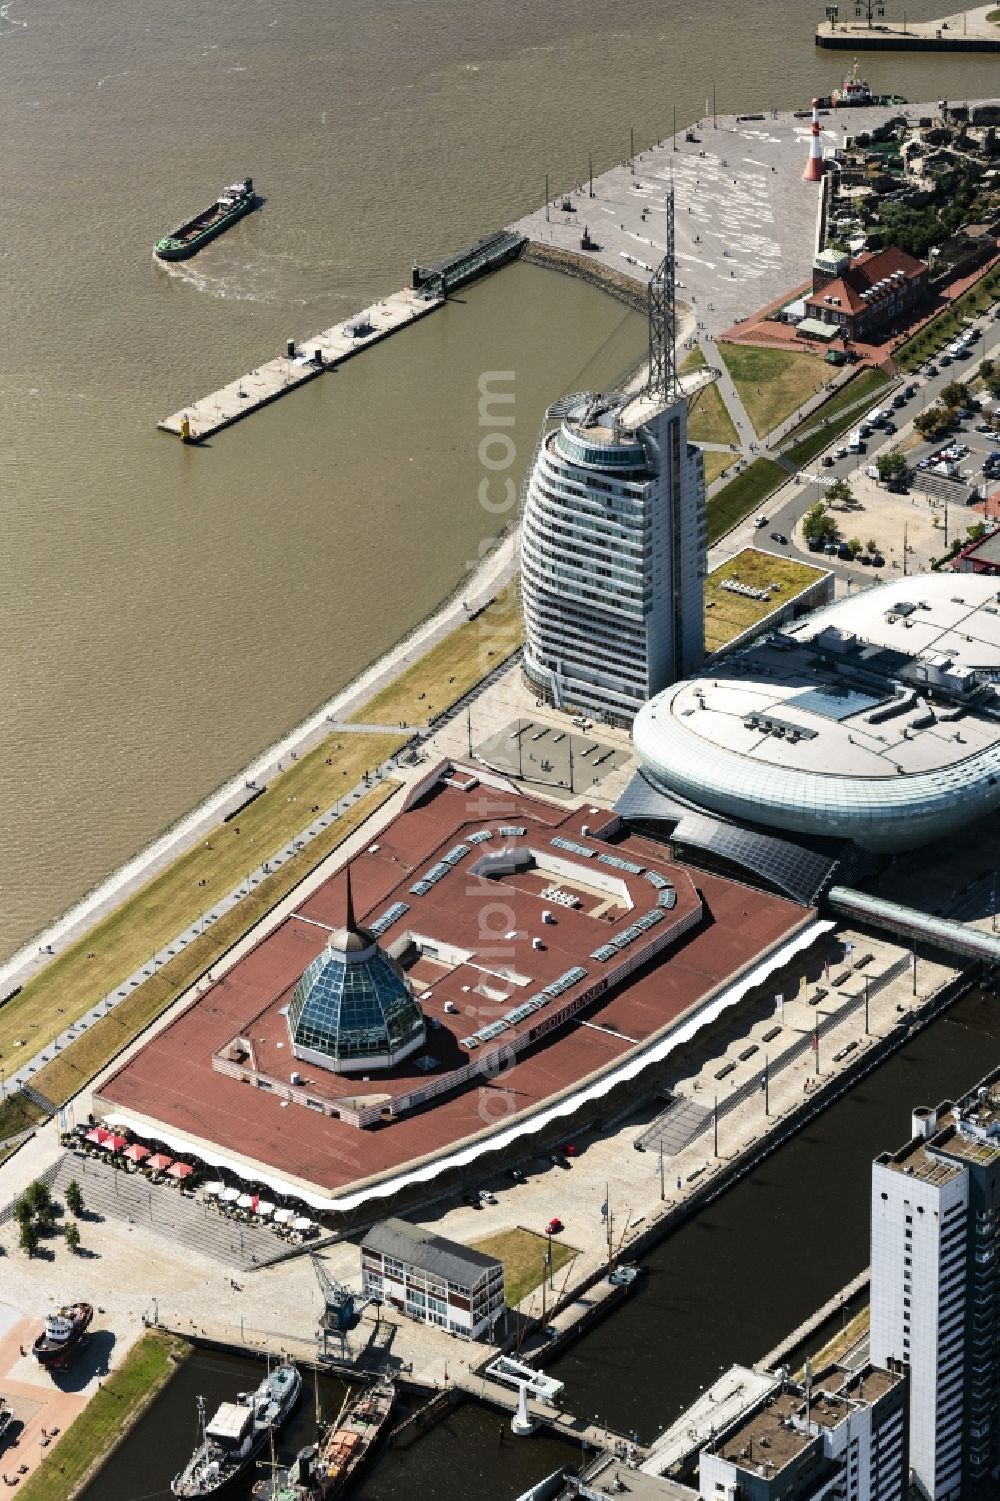 Bremerhaven from above - Atlantic Hotel Sail City and Klimahaus in Bremerhaven in the state of Bremen. The four star hotel with its bent front is located adjacent to the exhibition space of Klimahaus Bremerhaven 8A? Ost and on the riverbank of the Weser